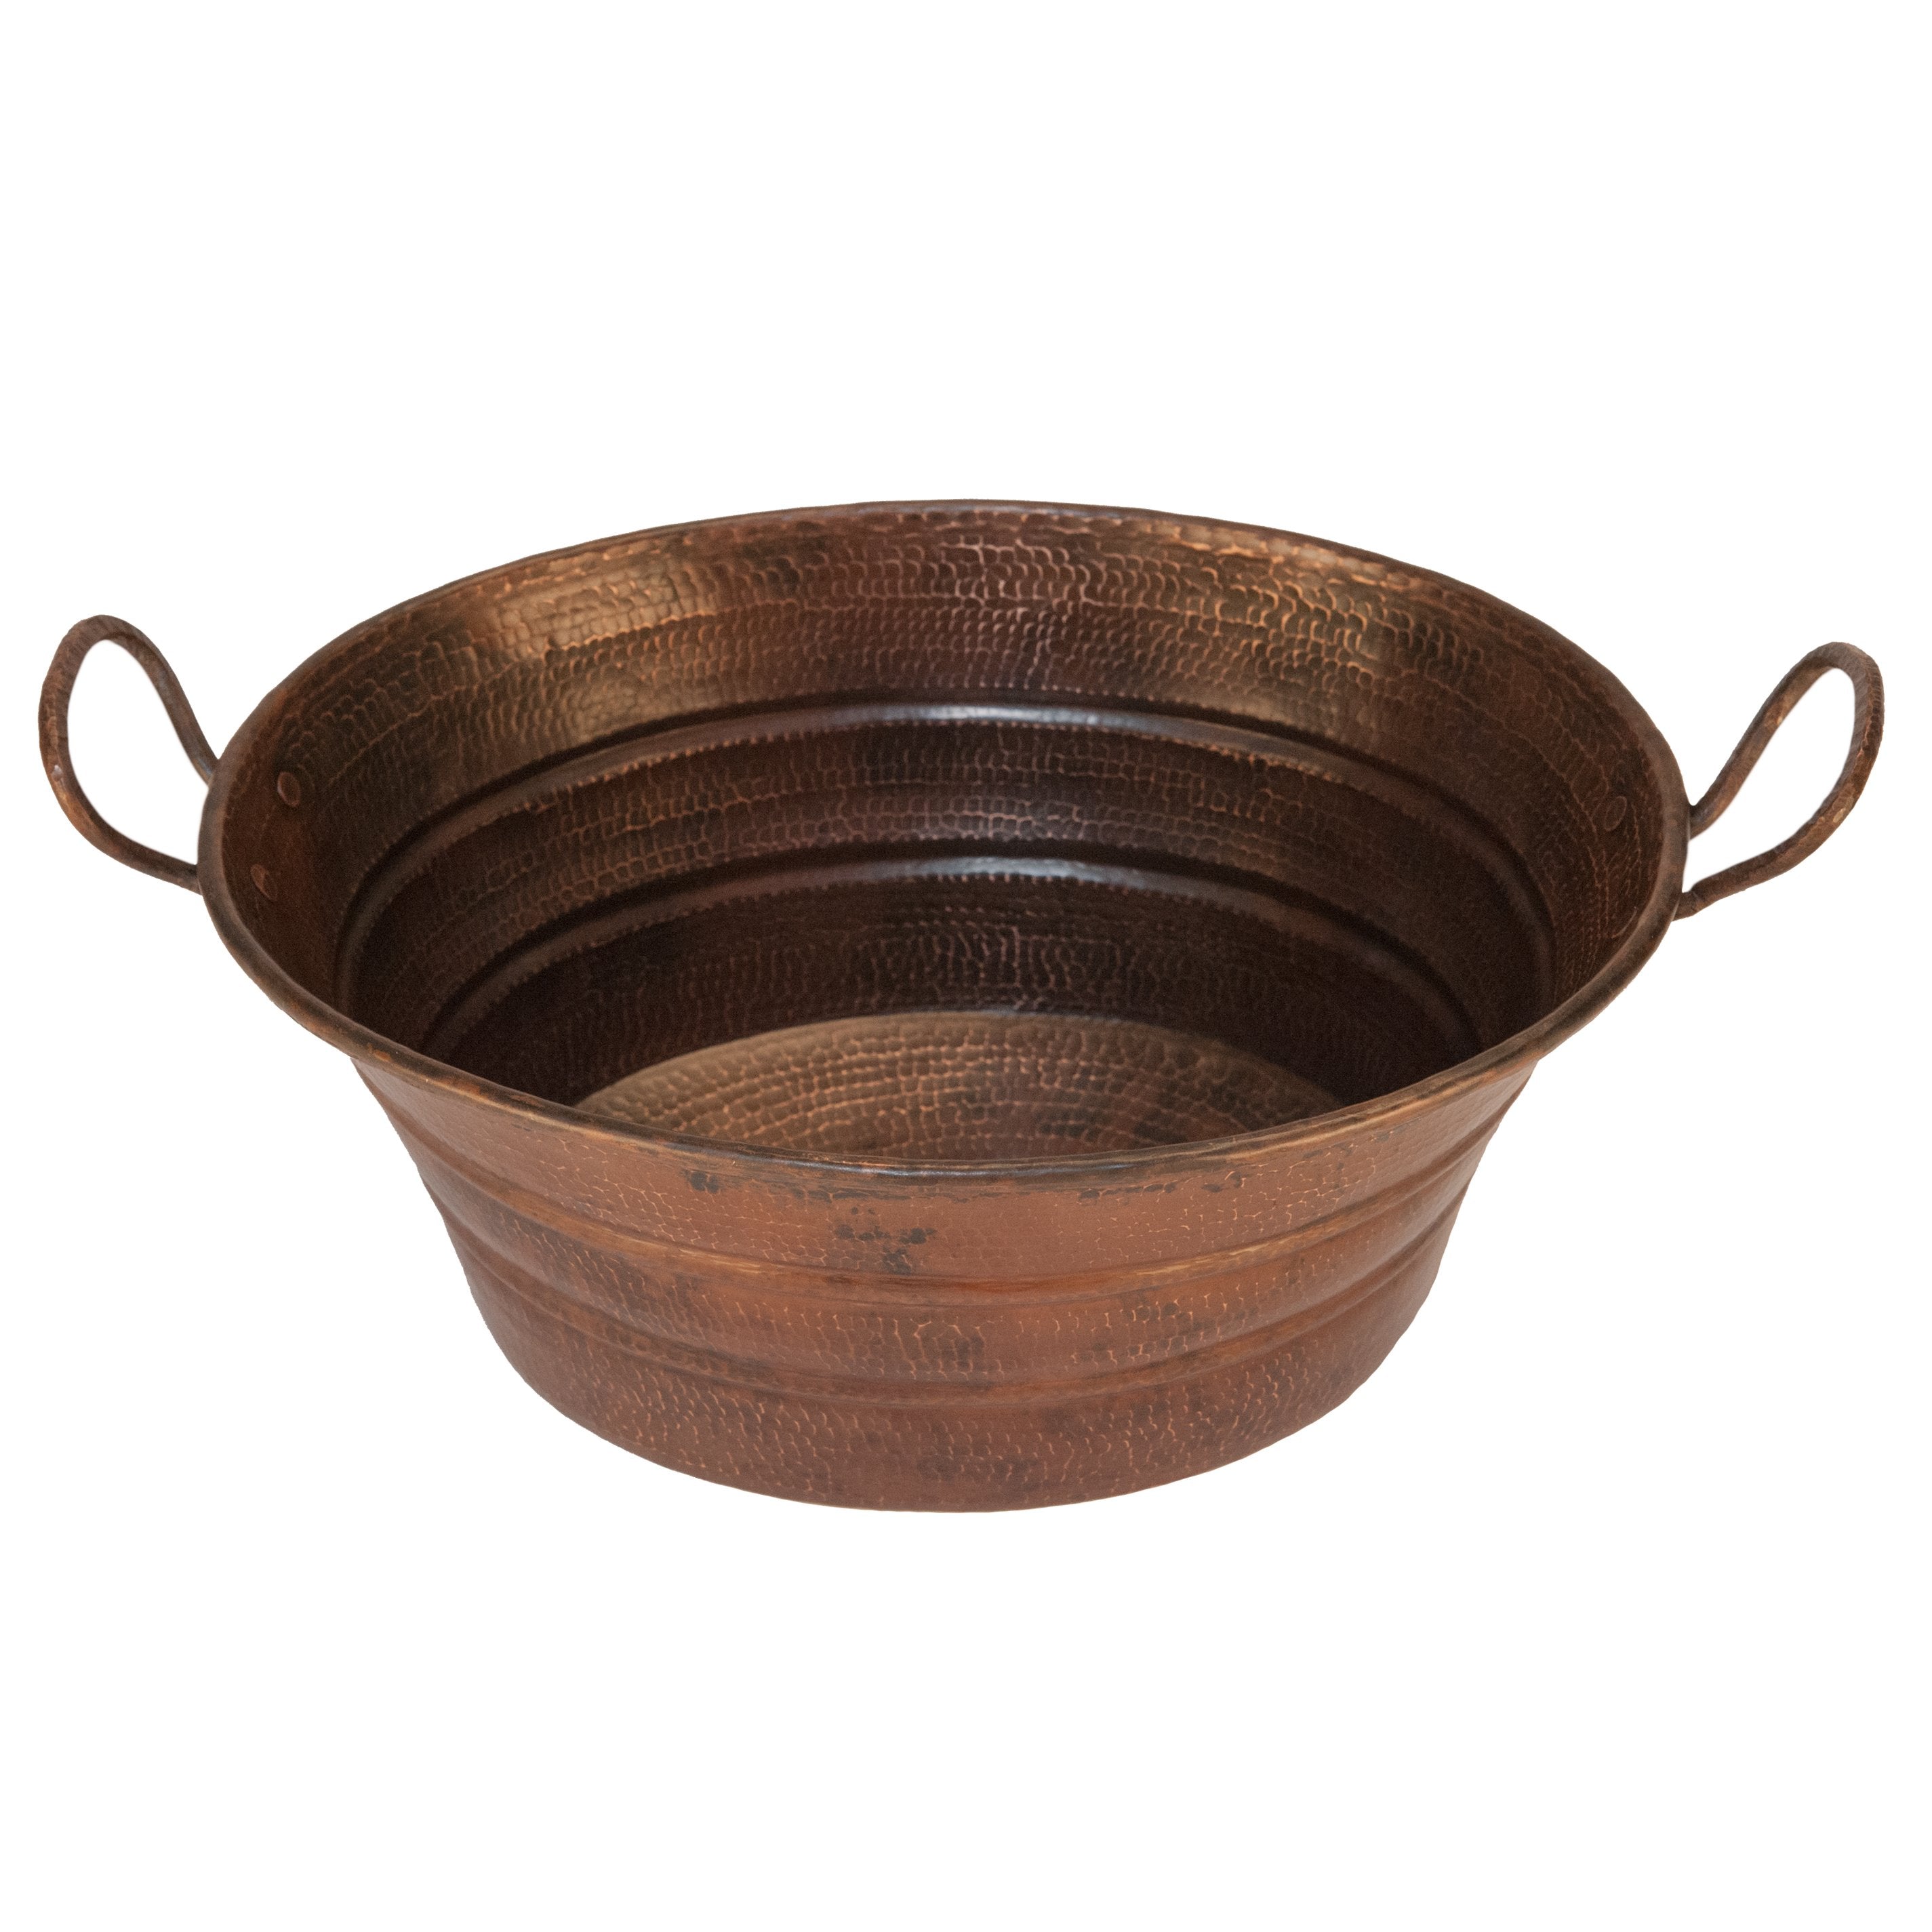 Premier Copper Products Oval Bucket Vessel Hammered Copper Sink with Handles-DirectSinks